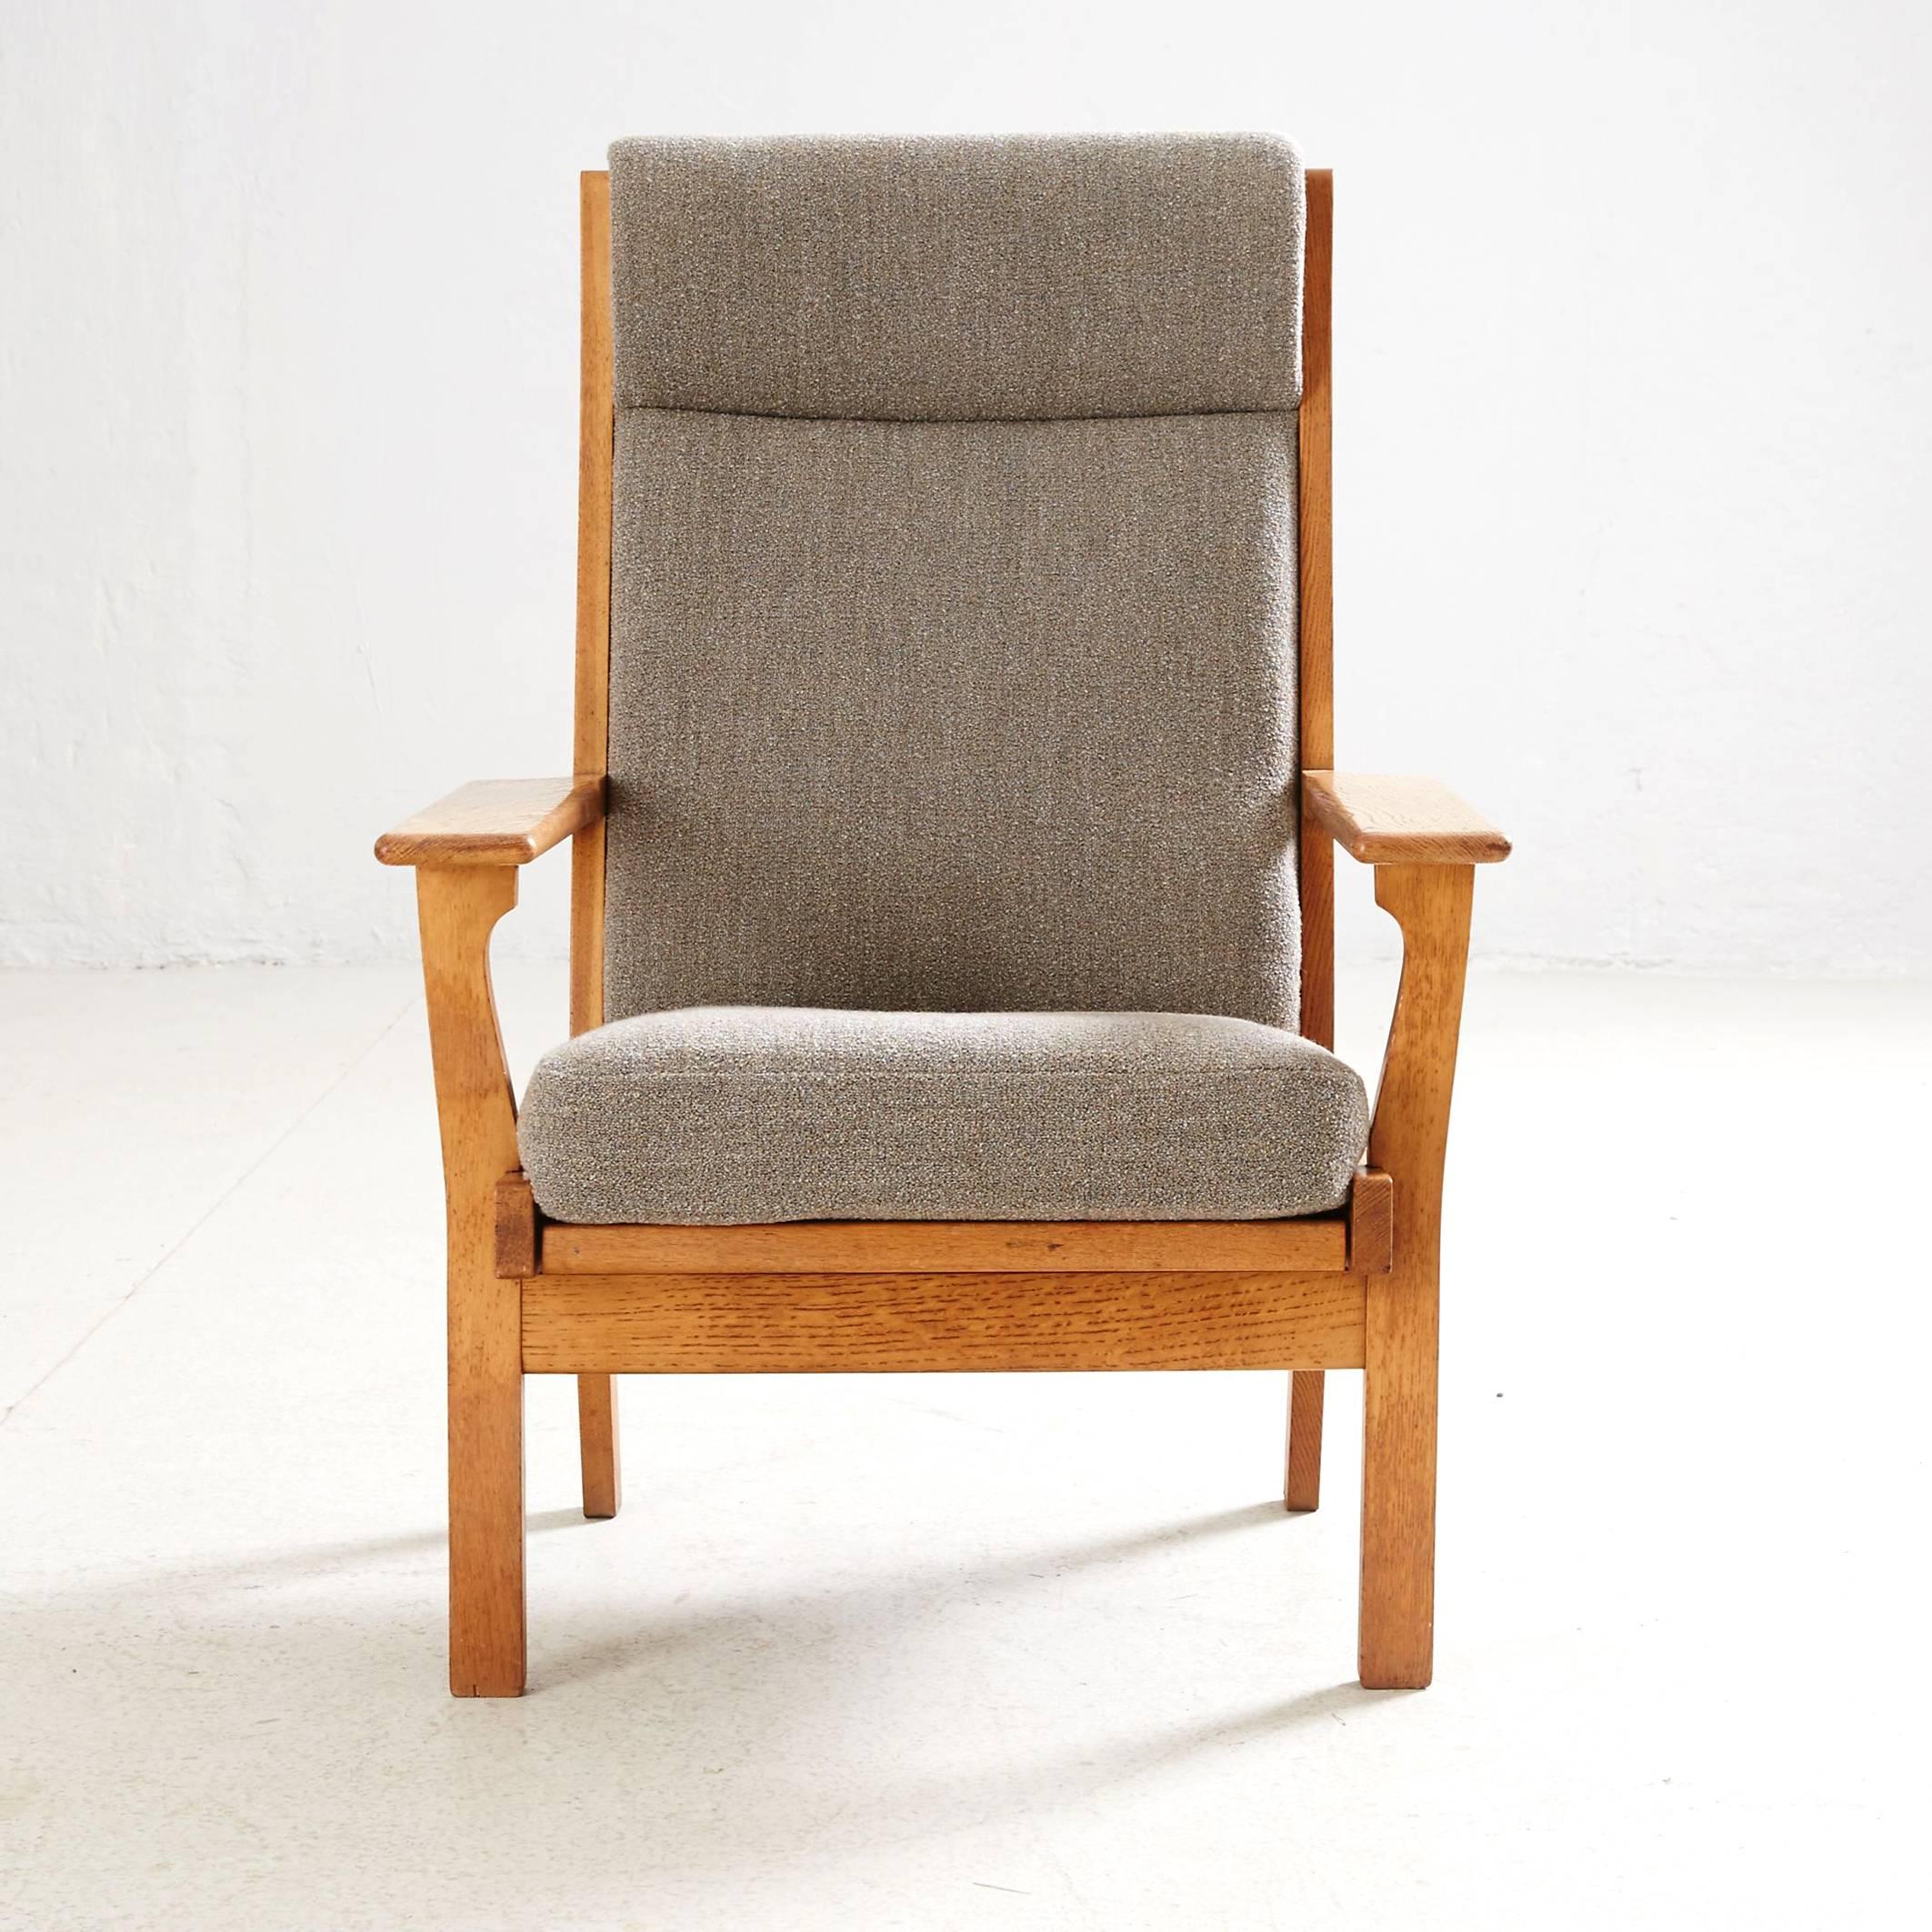 20th Century Hans Wegner High Back Lounge Chair by GETAMA For Sale